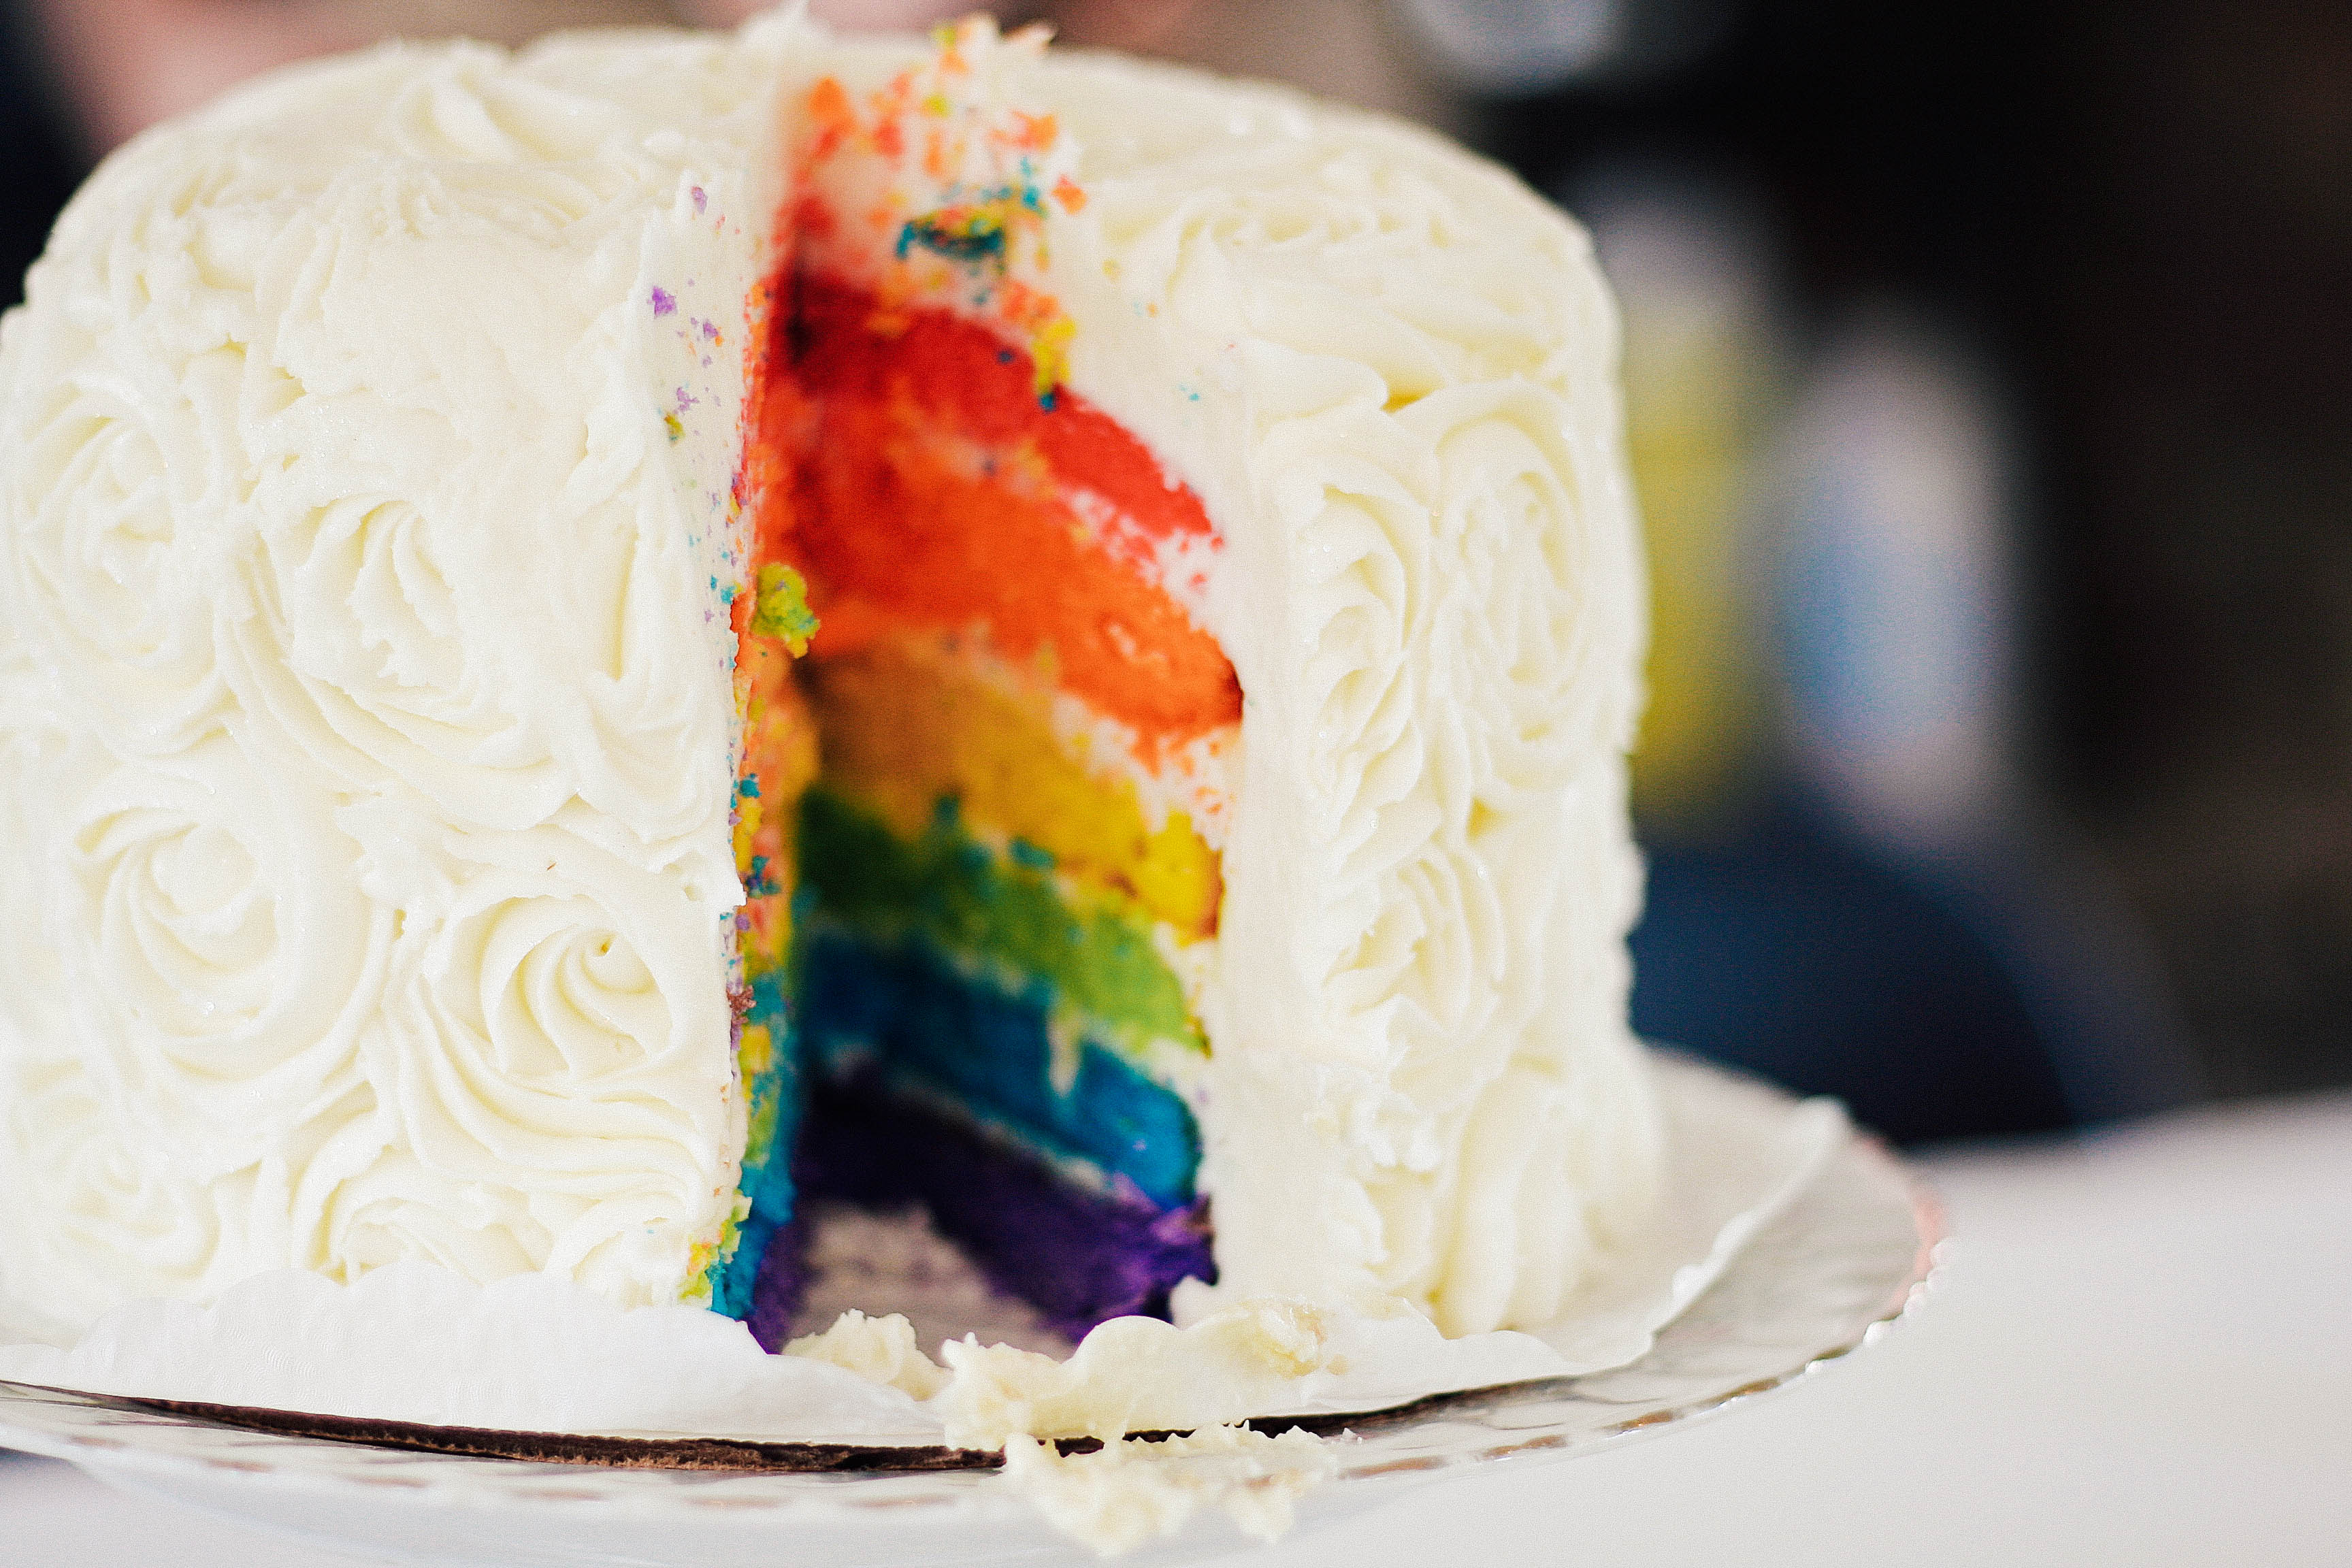 A rainbow cake that has had a slice cut out of it, revealing the colorful layers